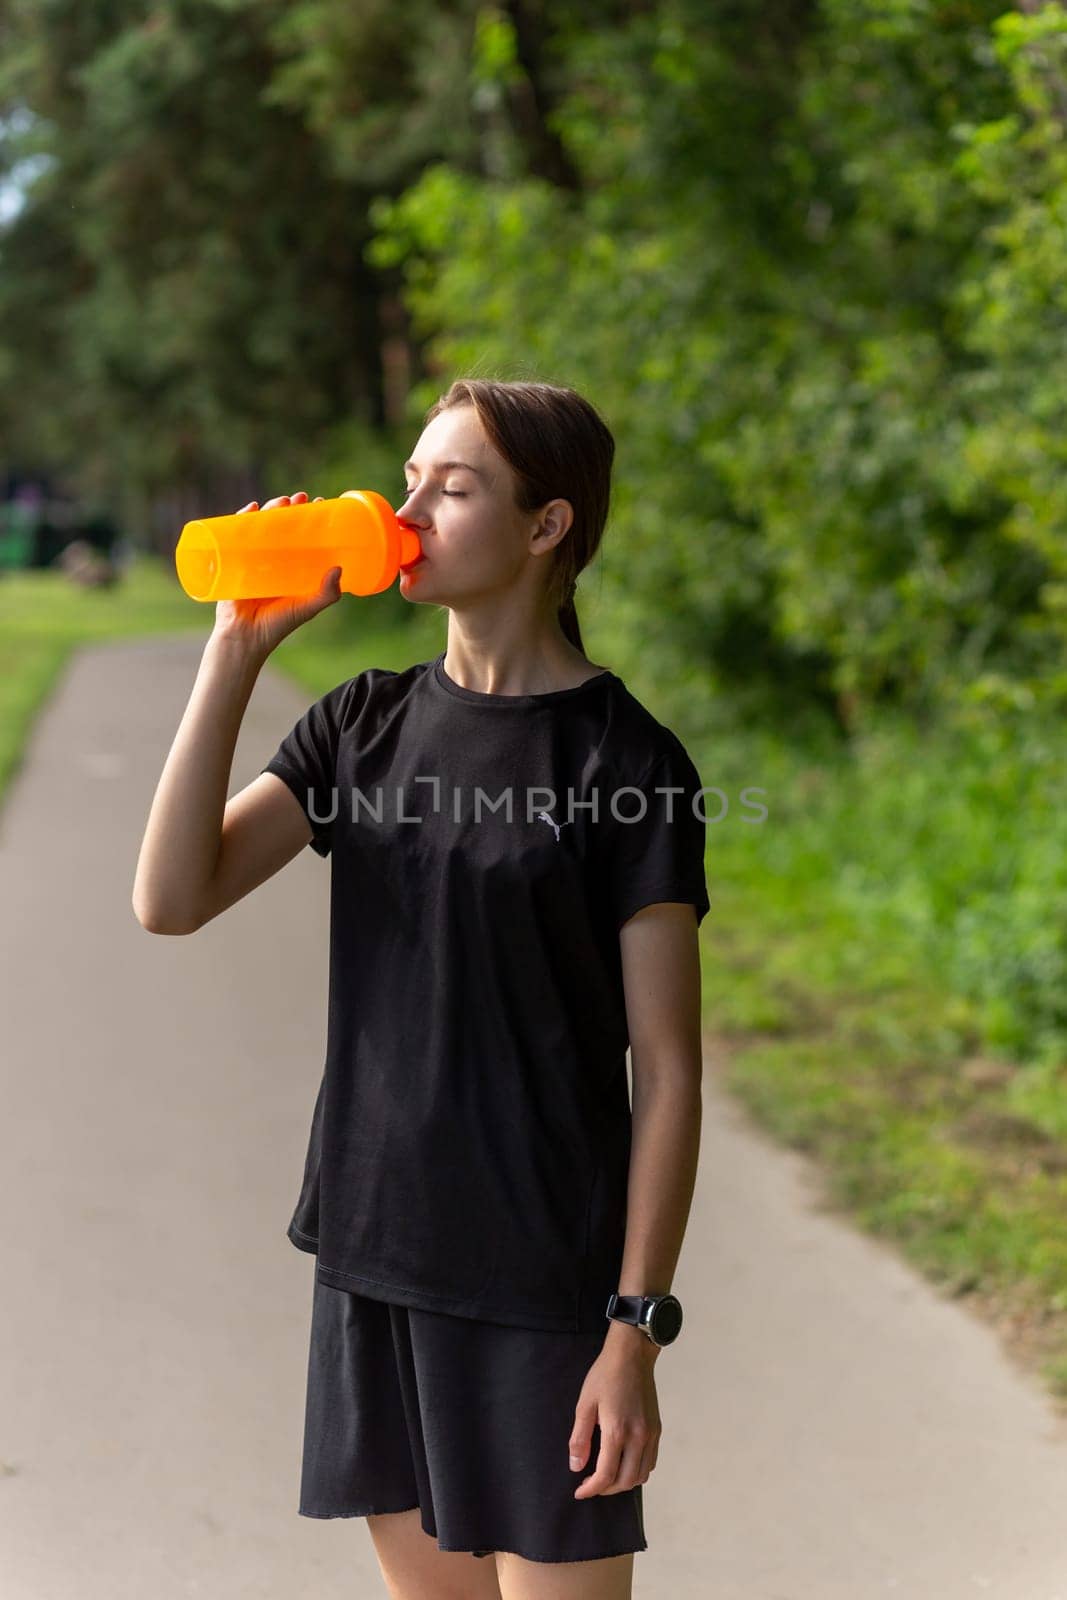 Fit tennage girl runner outdoors holding water bottle. by BY-_-BY